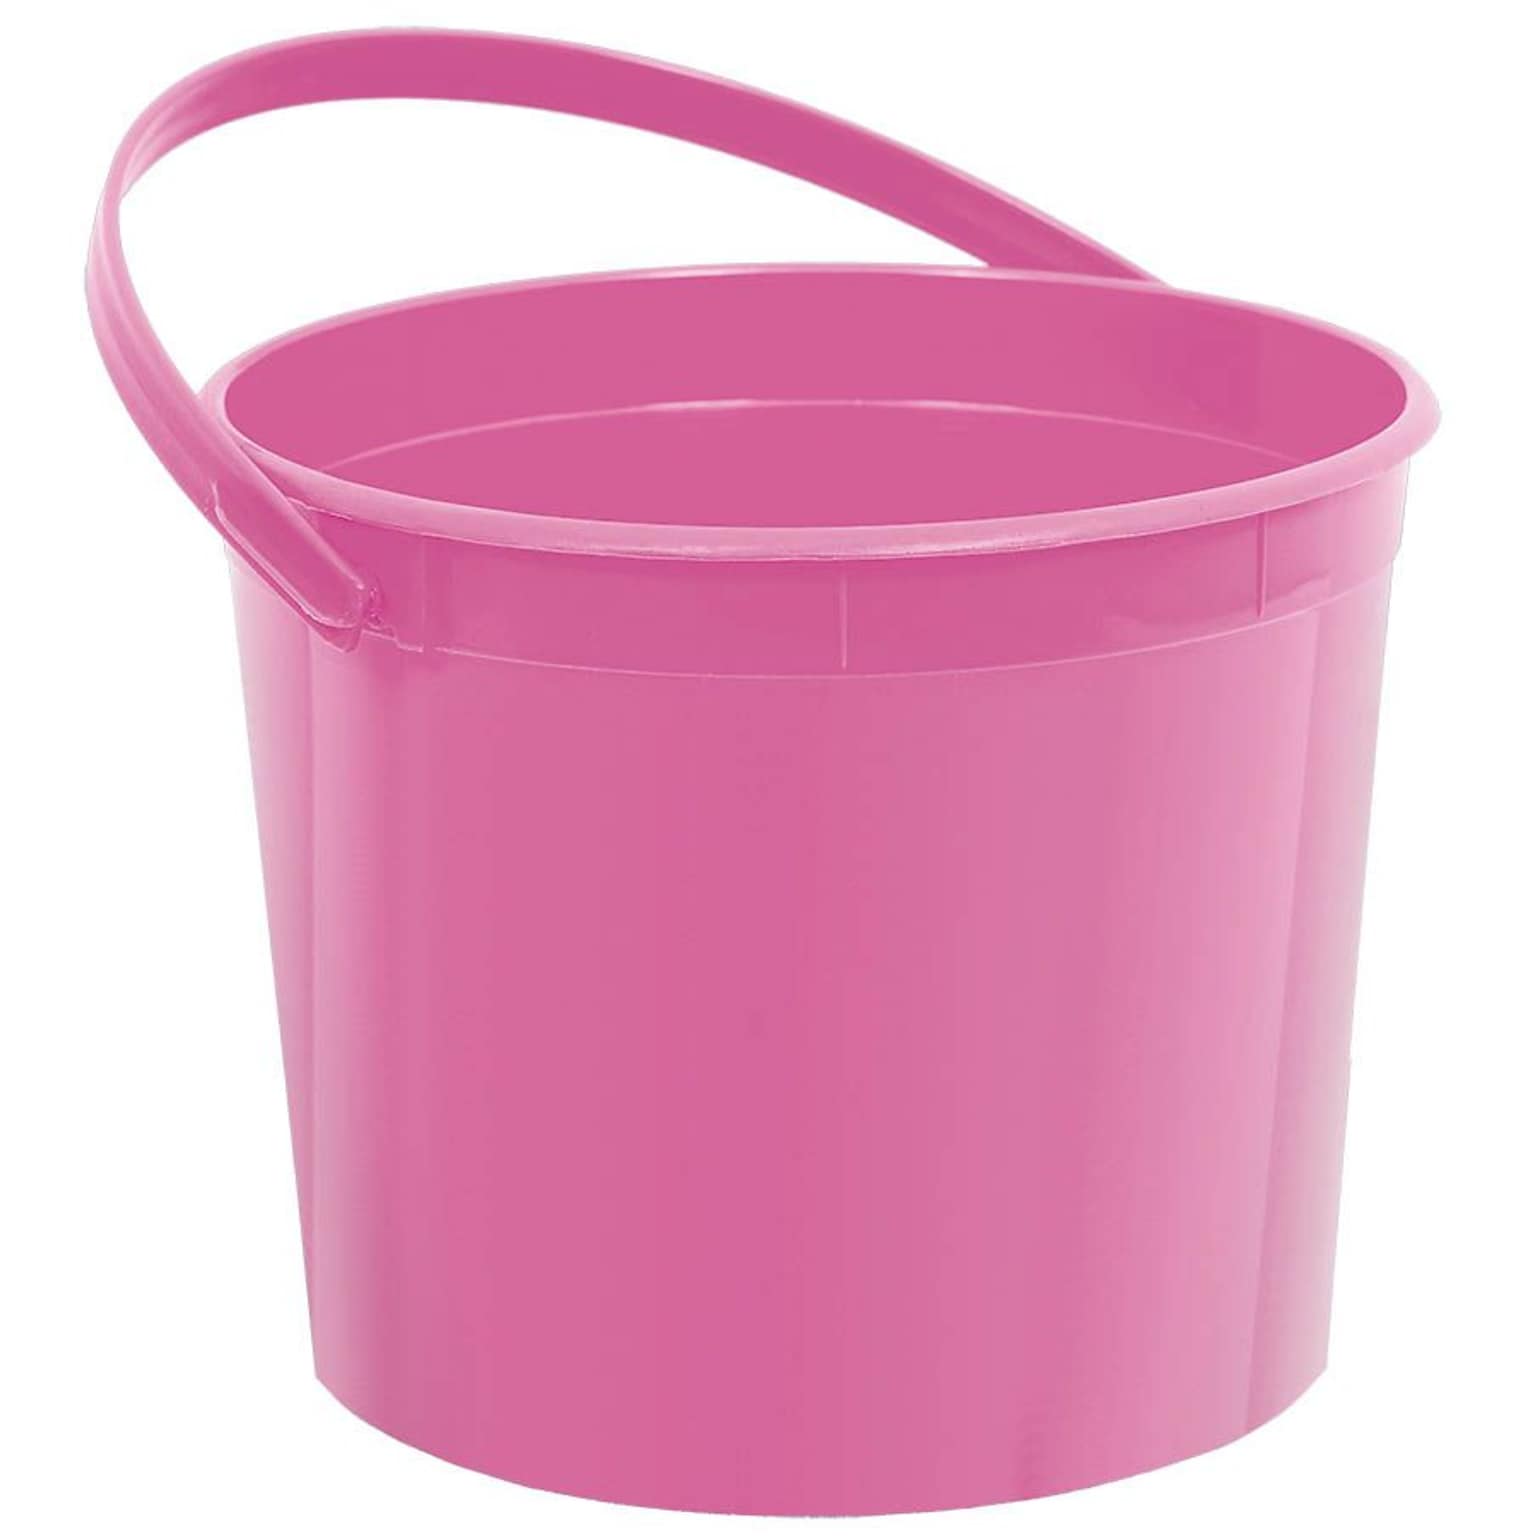 Amscan Plastic Bucket; 6.25, Bright Pink, 12/Pack (268902.103)